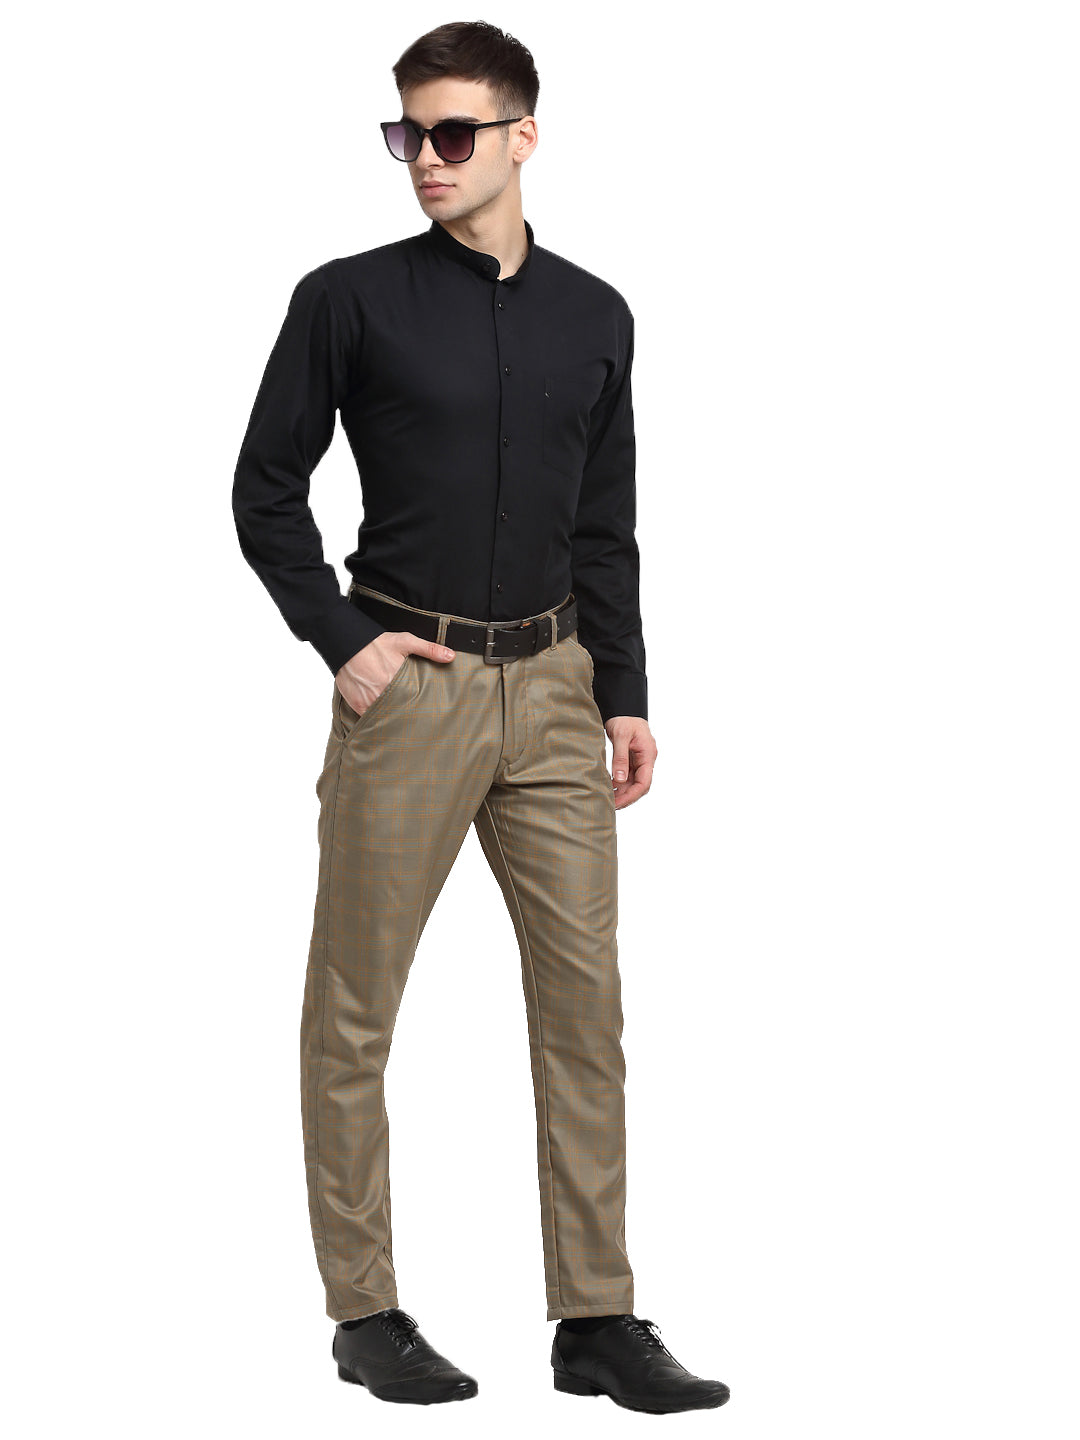 Jainish Men's Brown Cotton Checked Formal Trousers